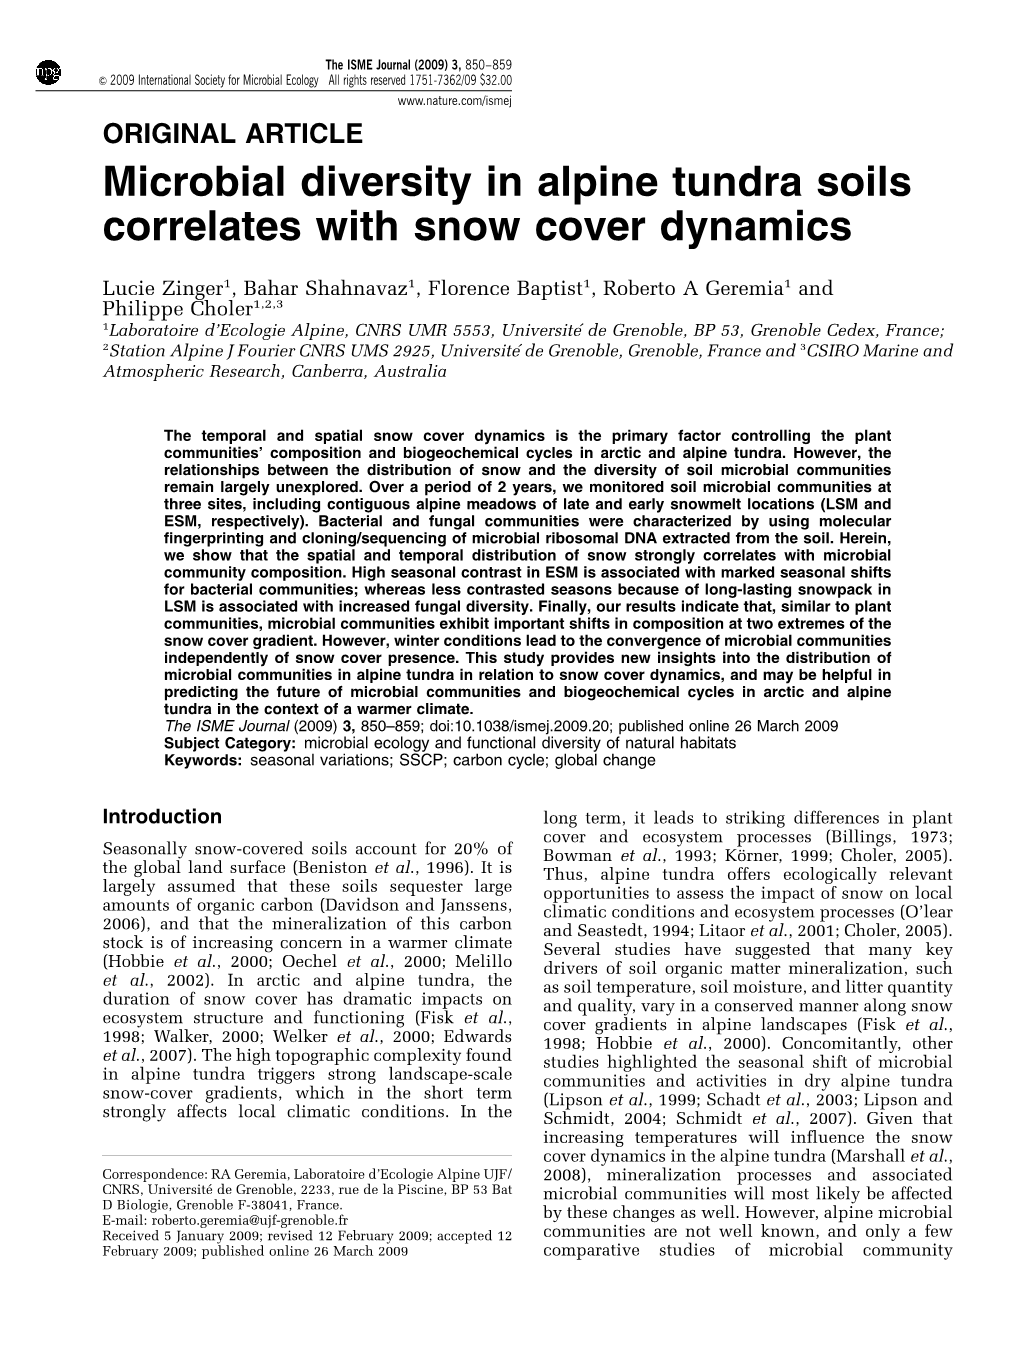 Microbial Diversity in Alpine Tundra Soils Correlates with Snow Cover Dynamics